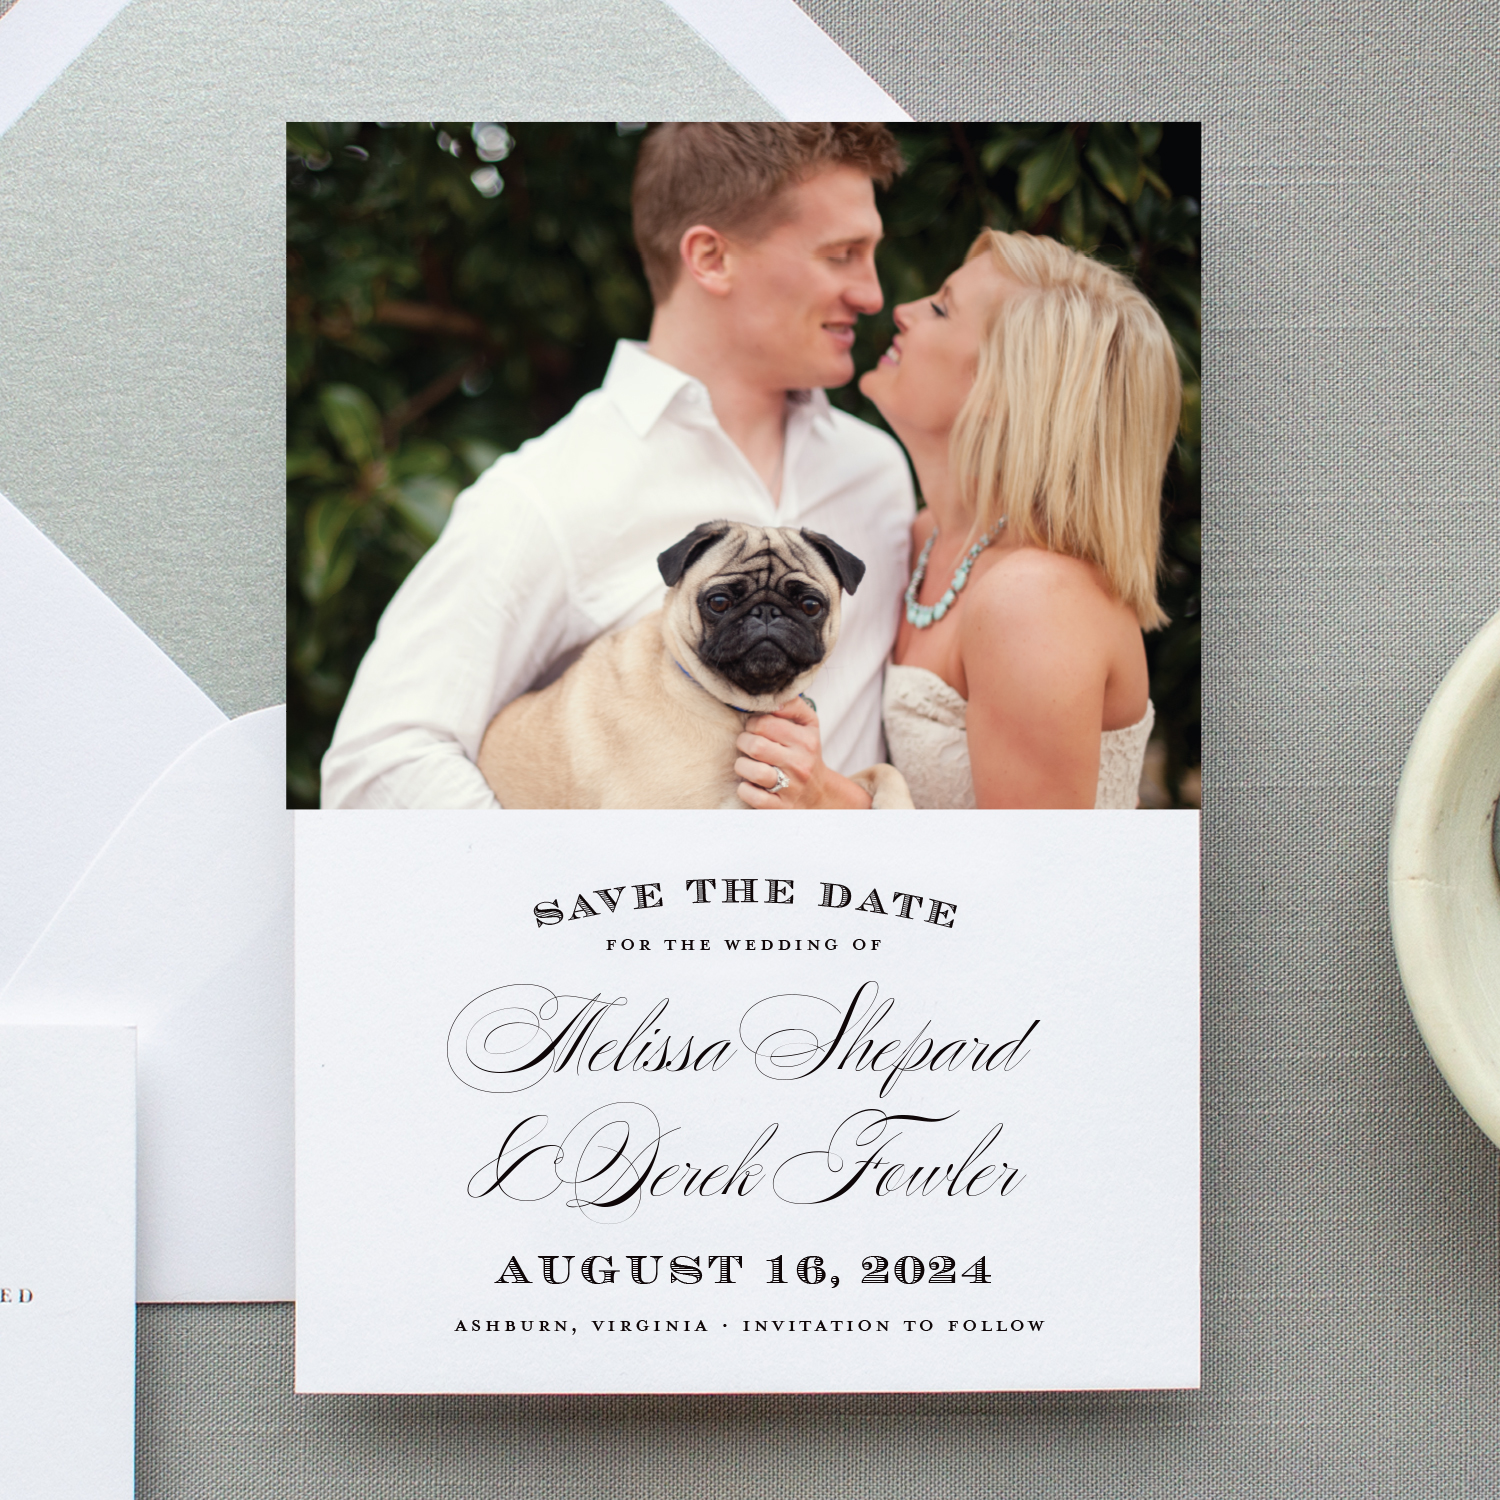 Photo Save the Date photo plus wording